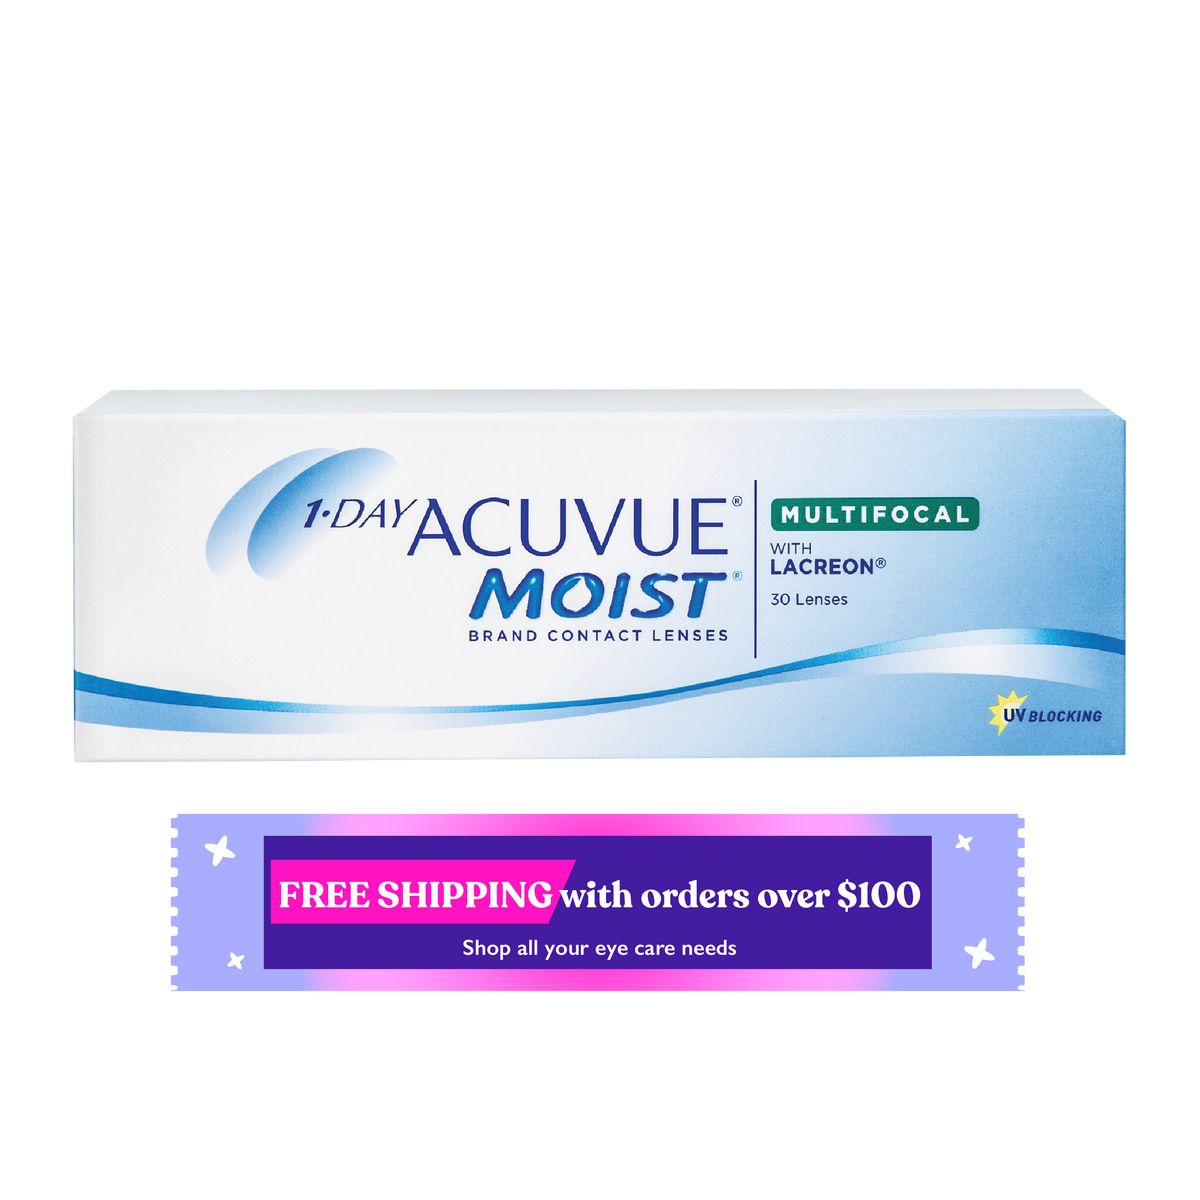 1-Day Acuvue Moist for Multifocal